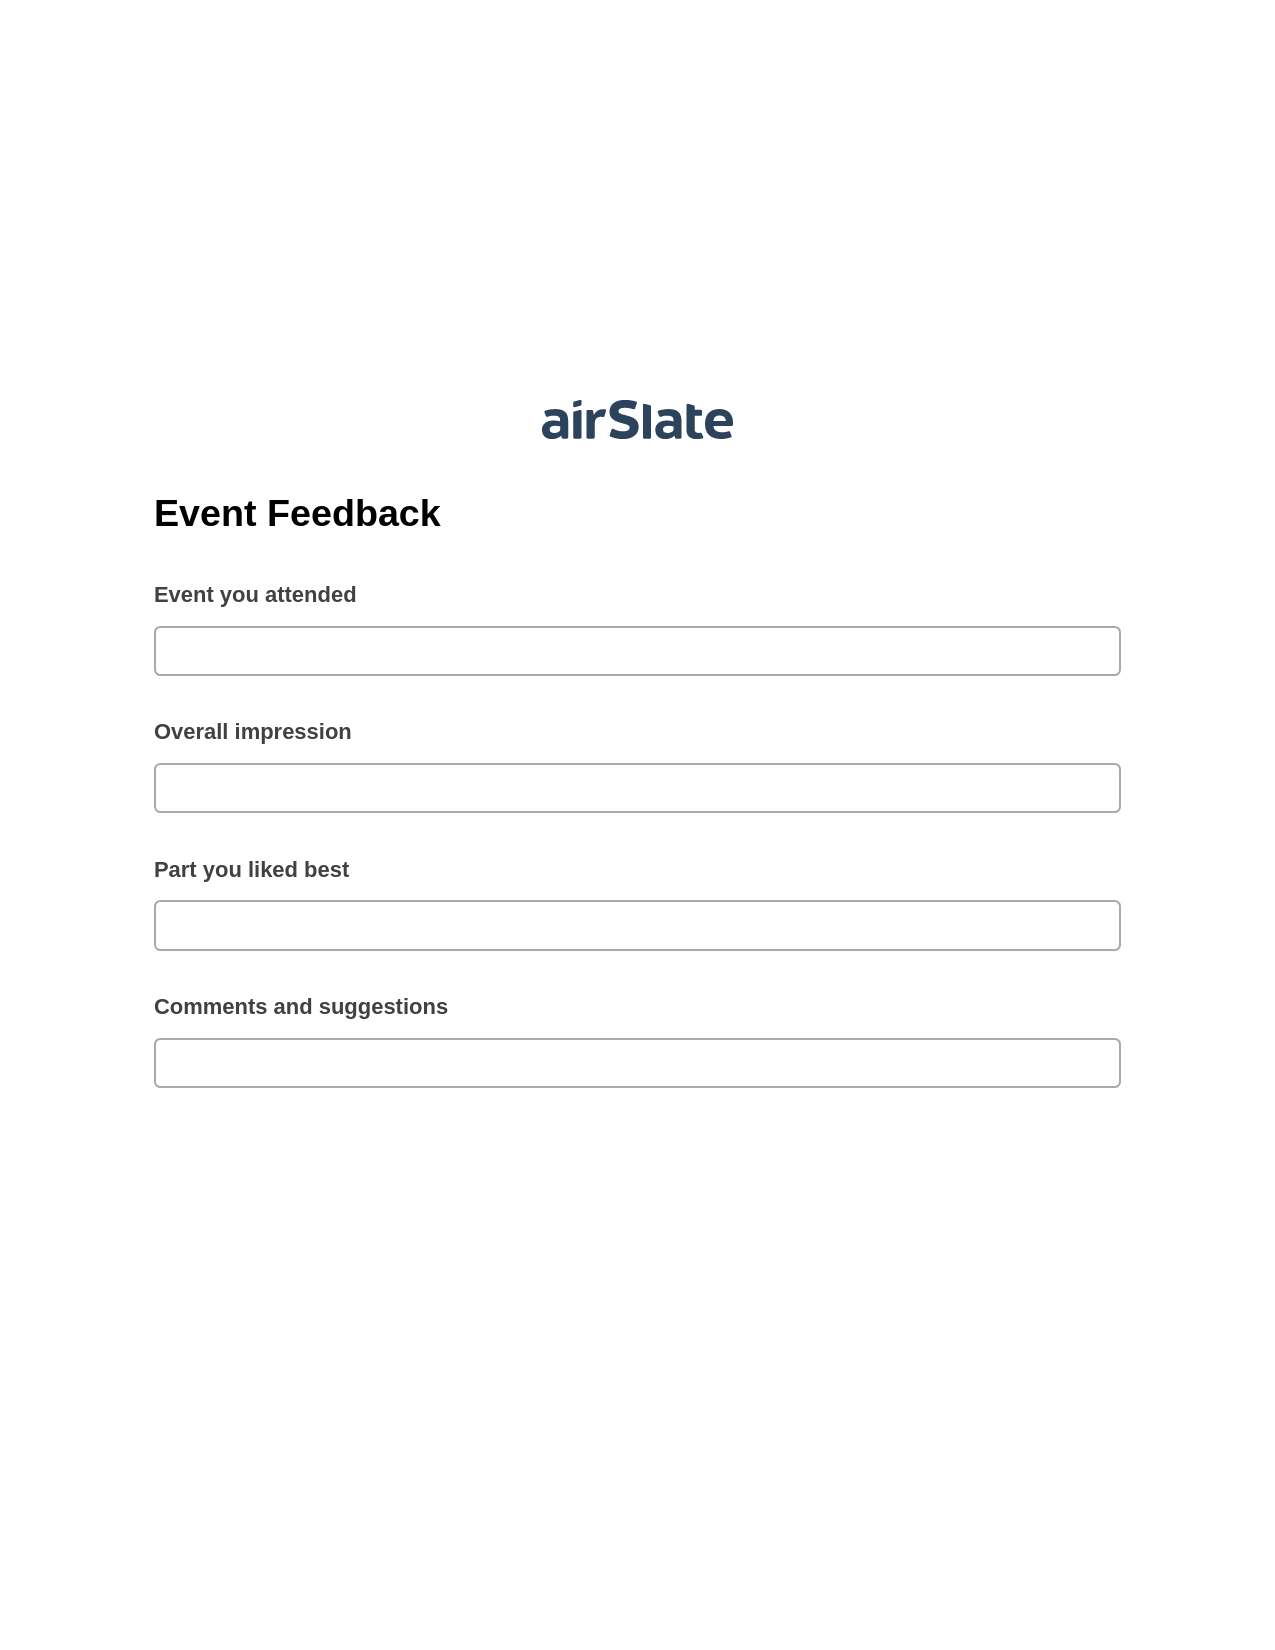 Event Feedback Pre-fill from NetSuite Records Bot, Update NetSuite Records Bot, Webhook Postfinish Bot